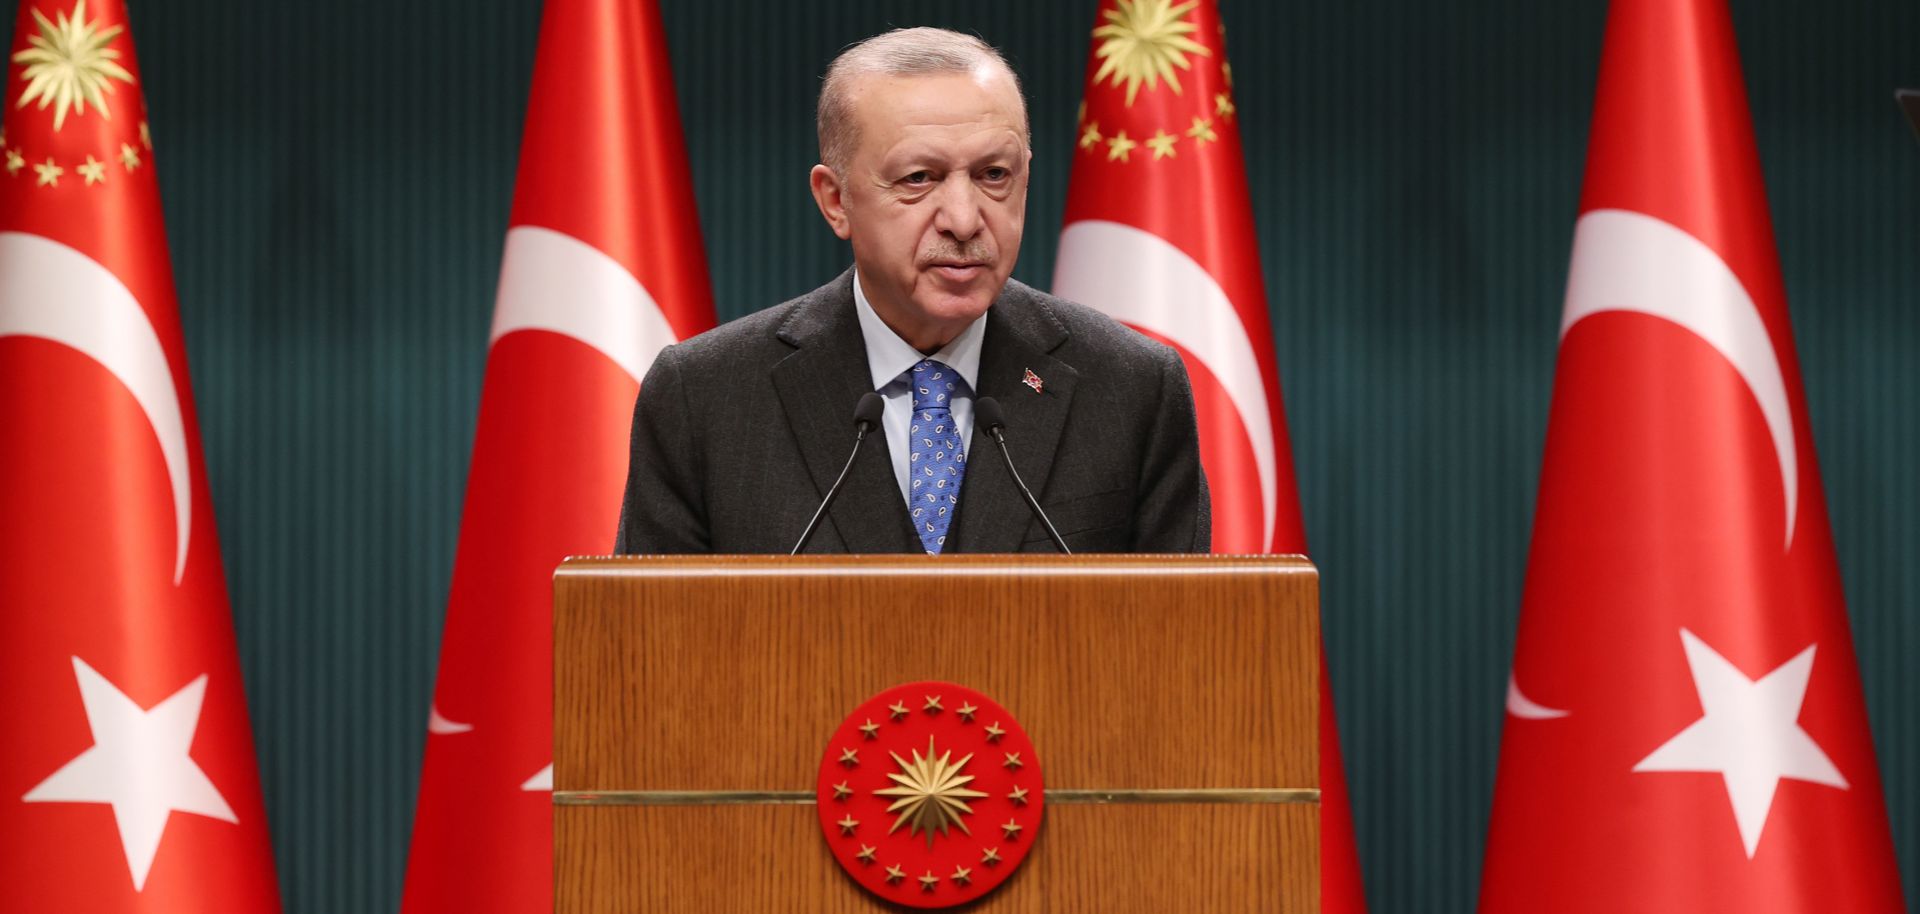 Turkish President Recep Tayyip Erdogan makes a statement on Feb. 28, 2022, in Ankara after holding a cabinet meeting focused on the Russia-Ukraine crisis.